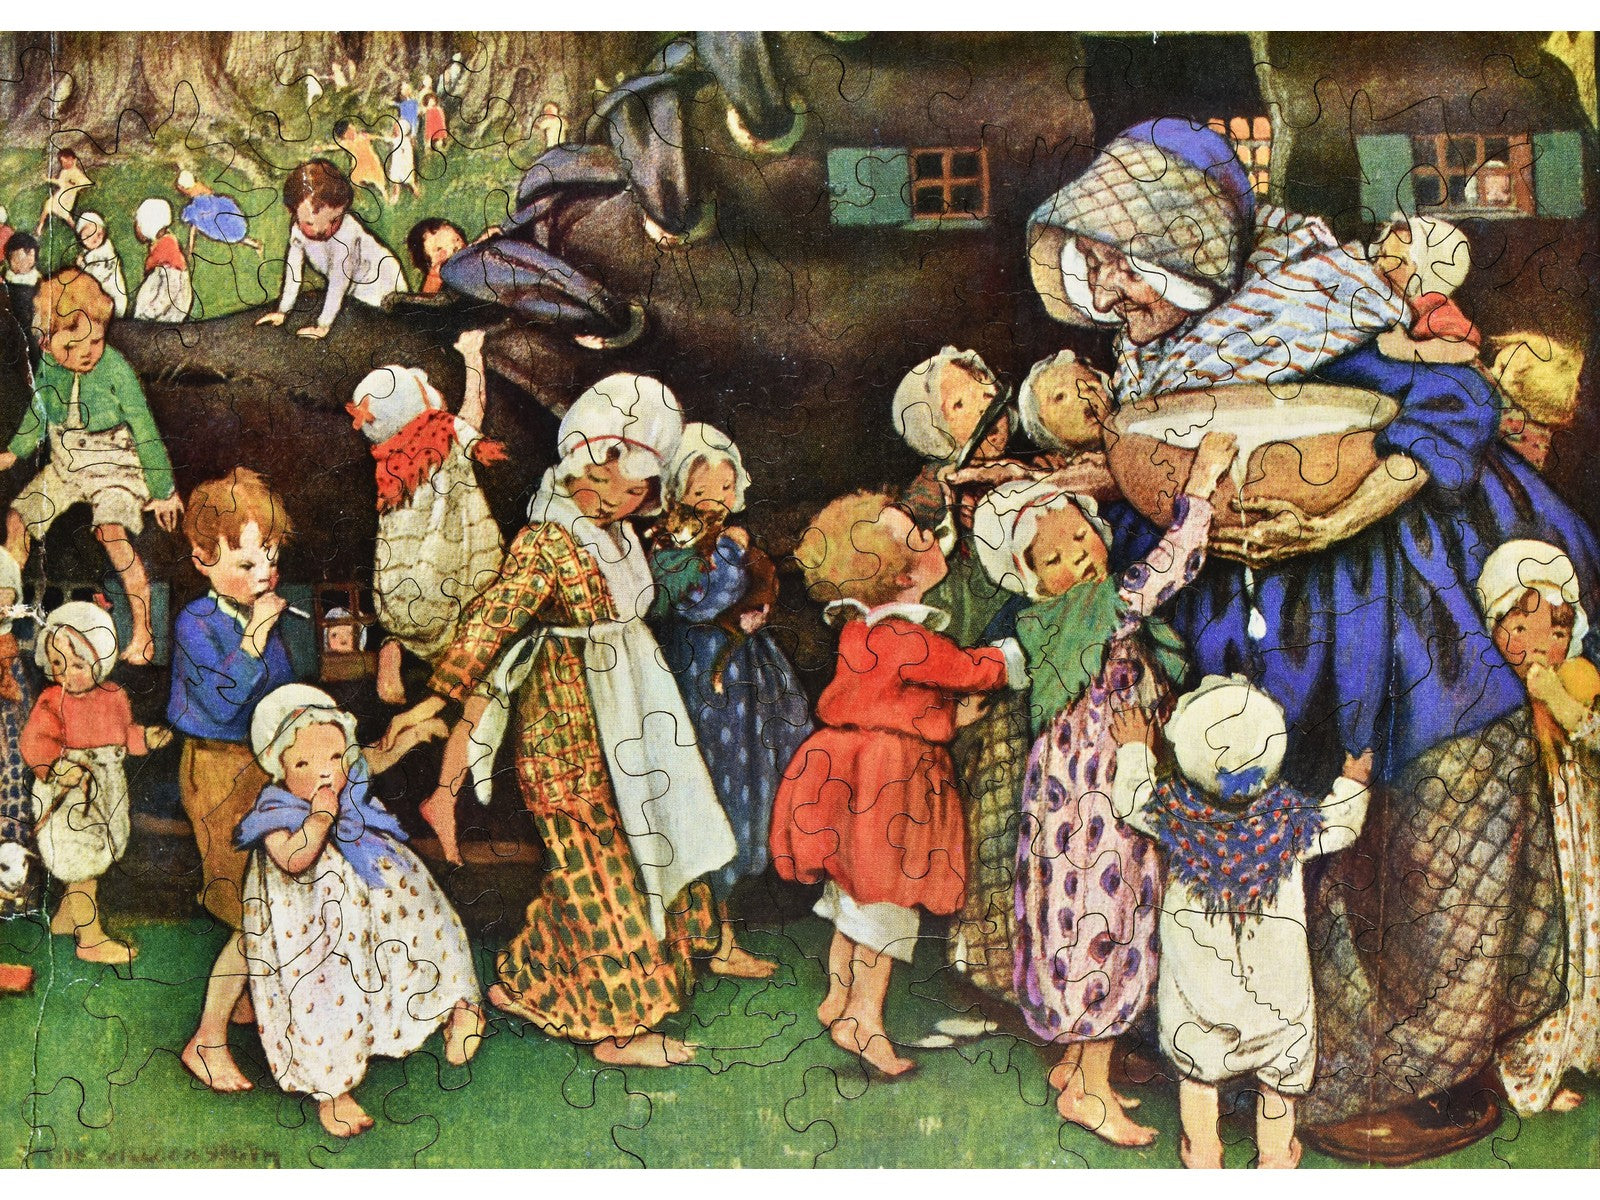 The front of the puzzle, Old Woman in Shoe, which shows an old woman and many children around a large shoe.